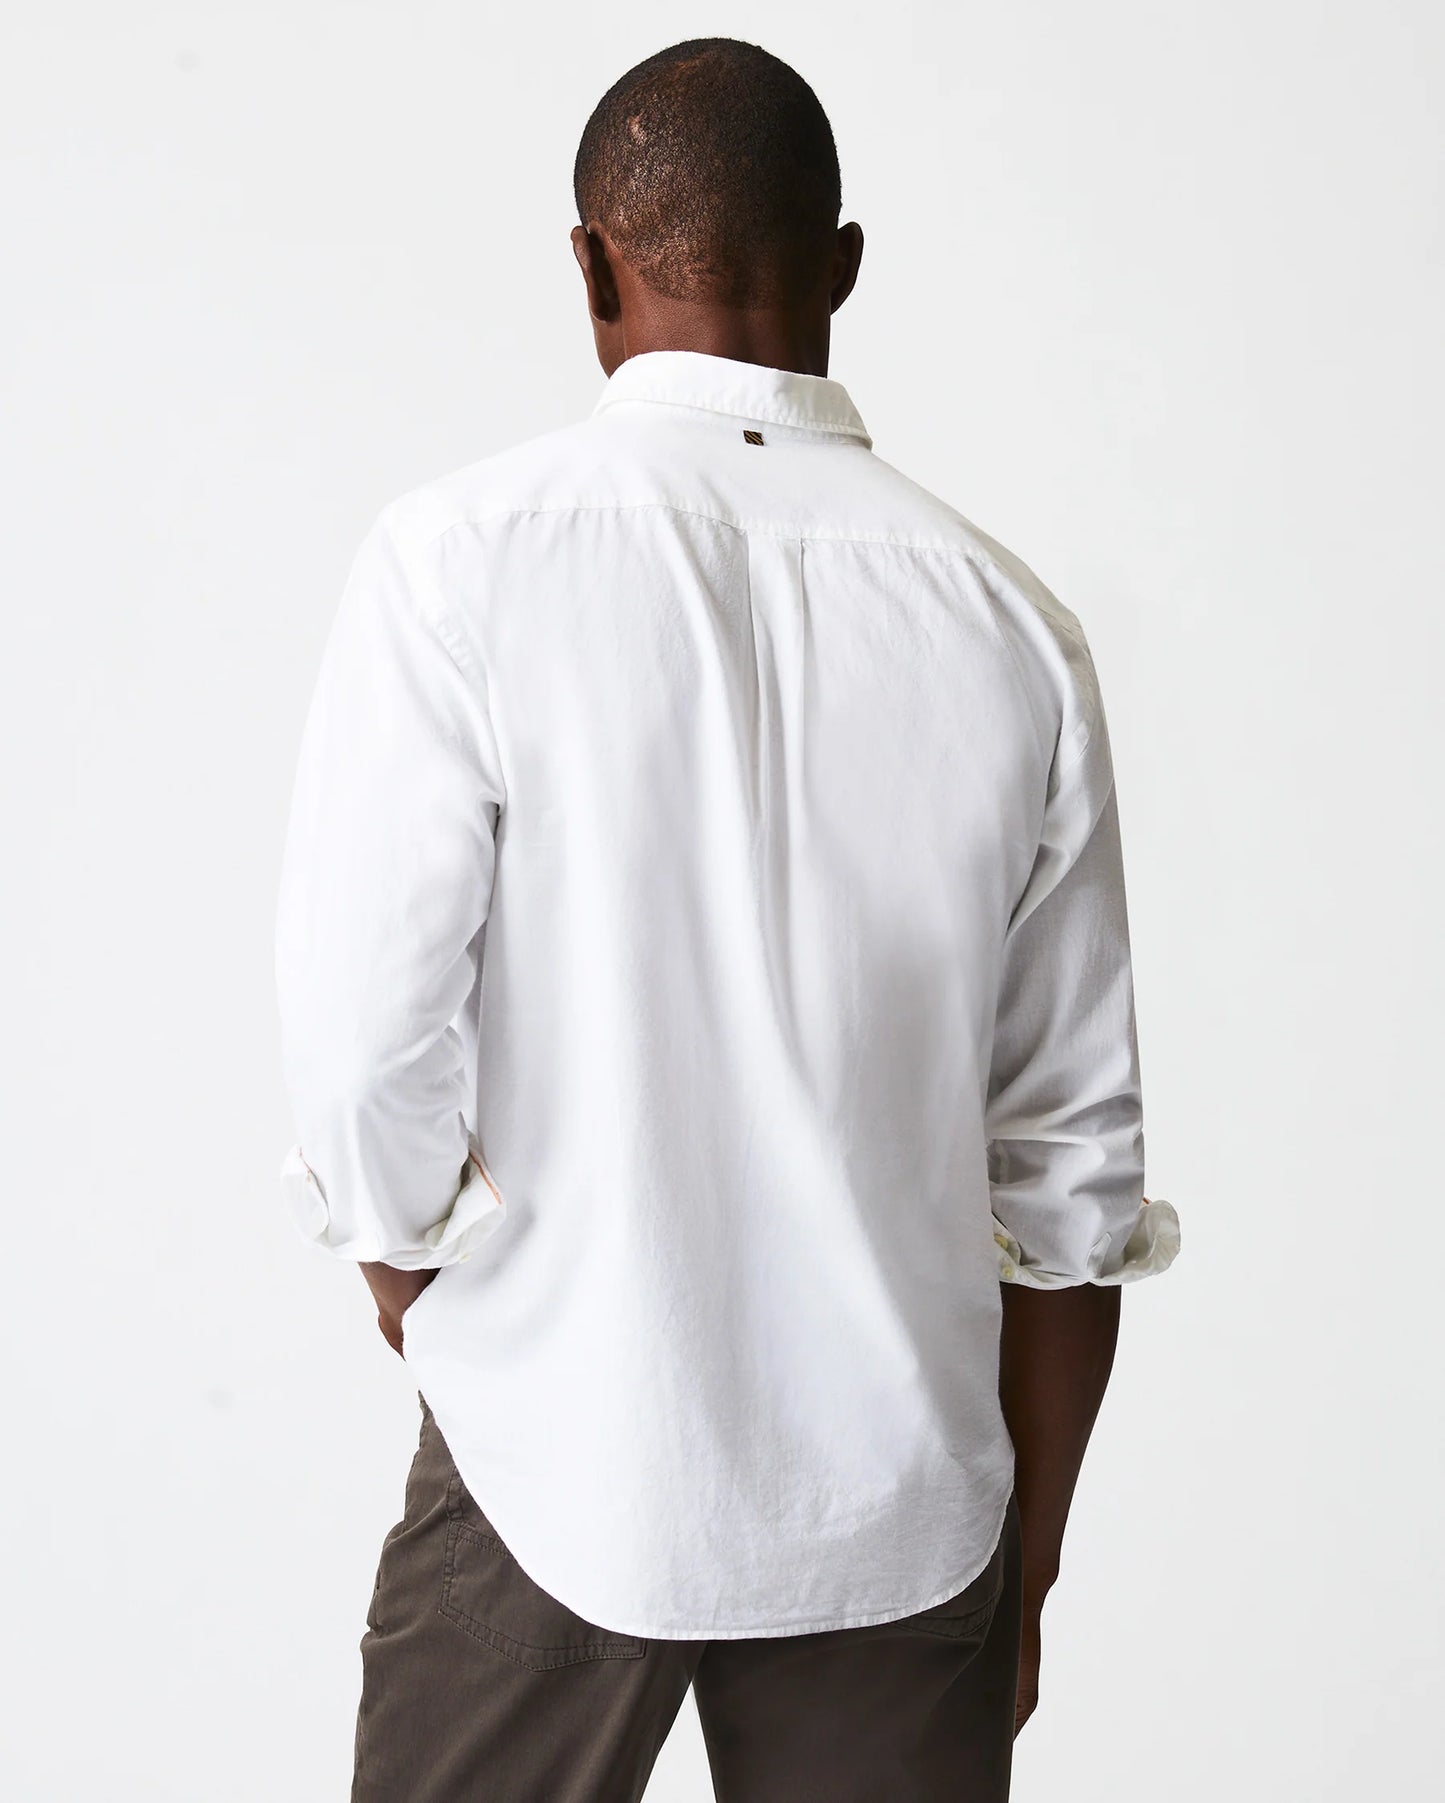 Back view of man wearing a white button up shirt with a single chest pocket 